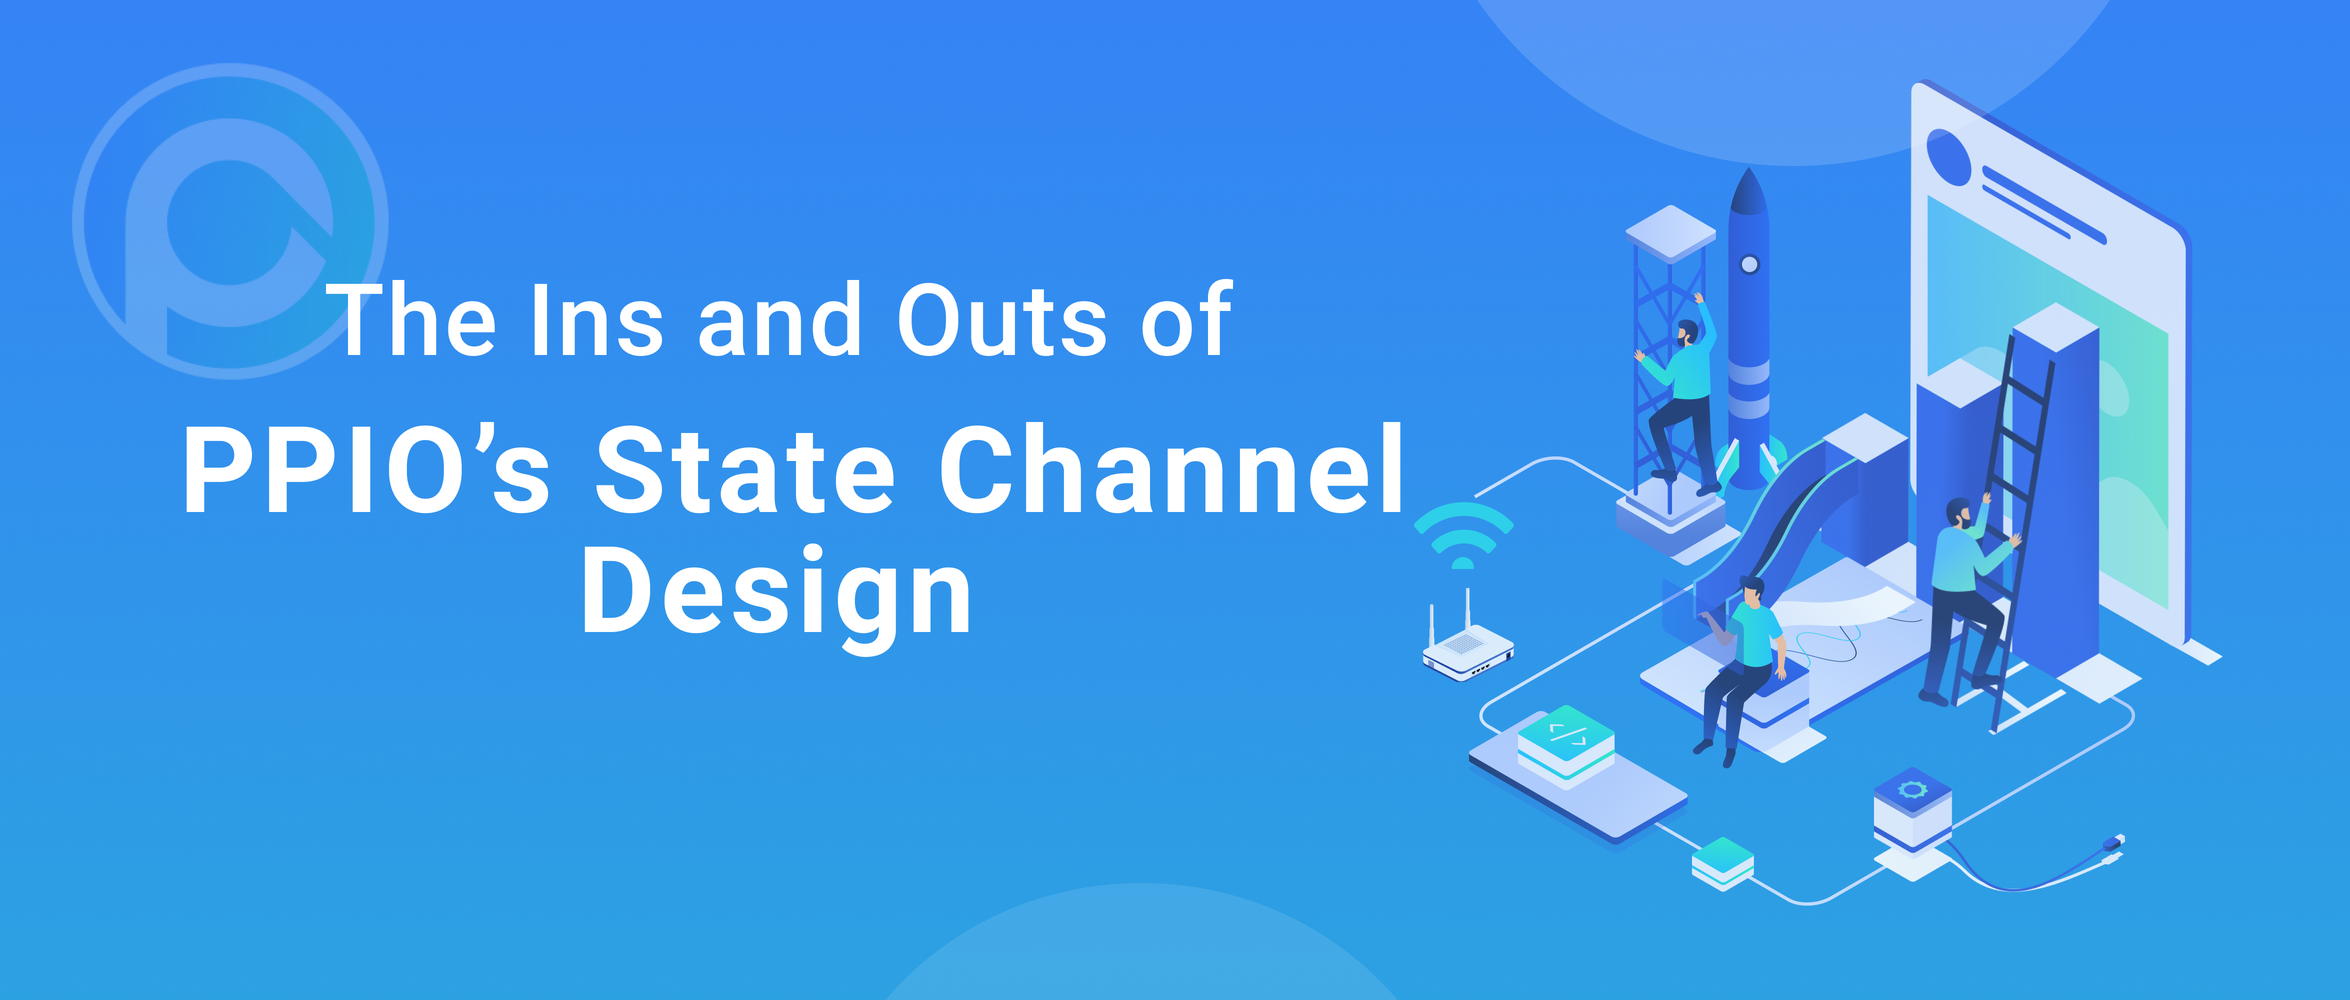 The Ins and Outs of PPIO’s State Channel Design